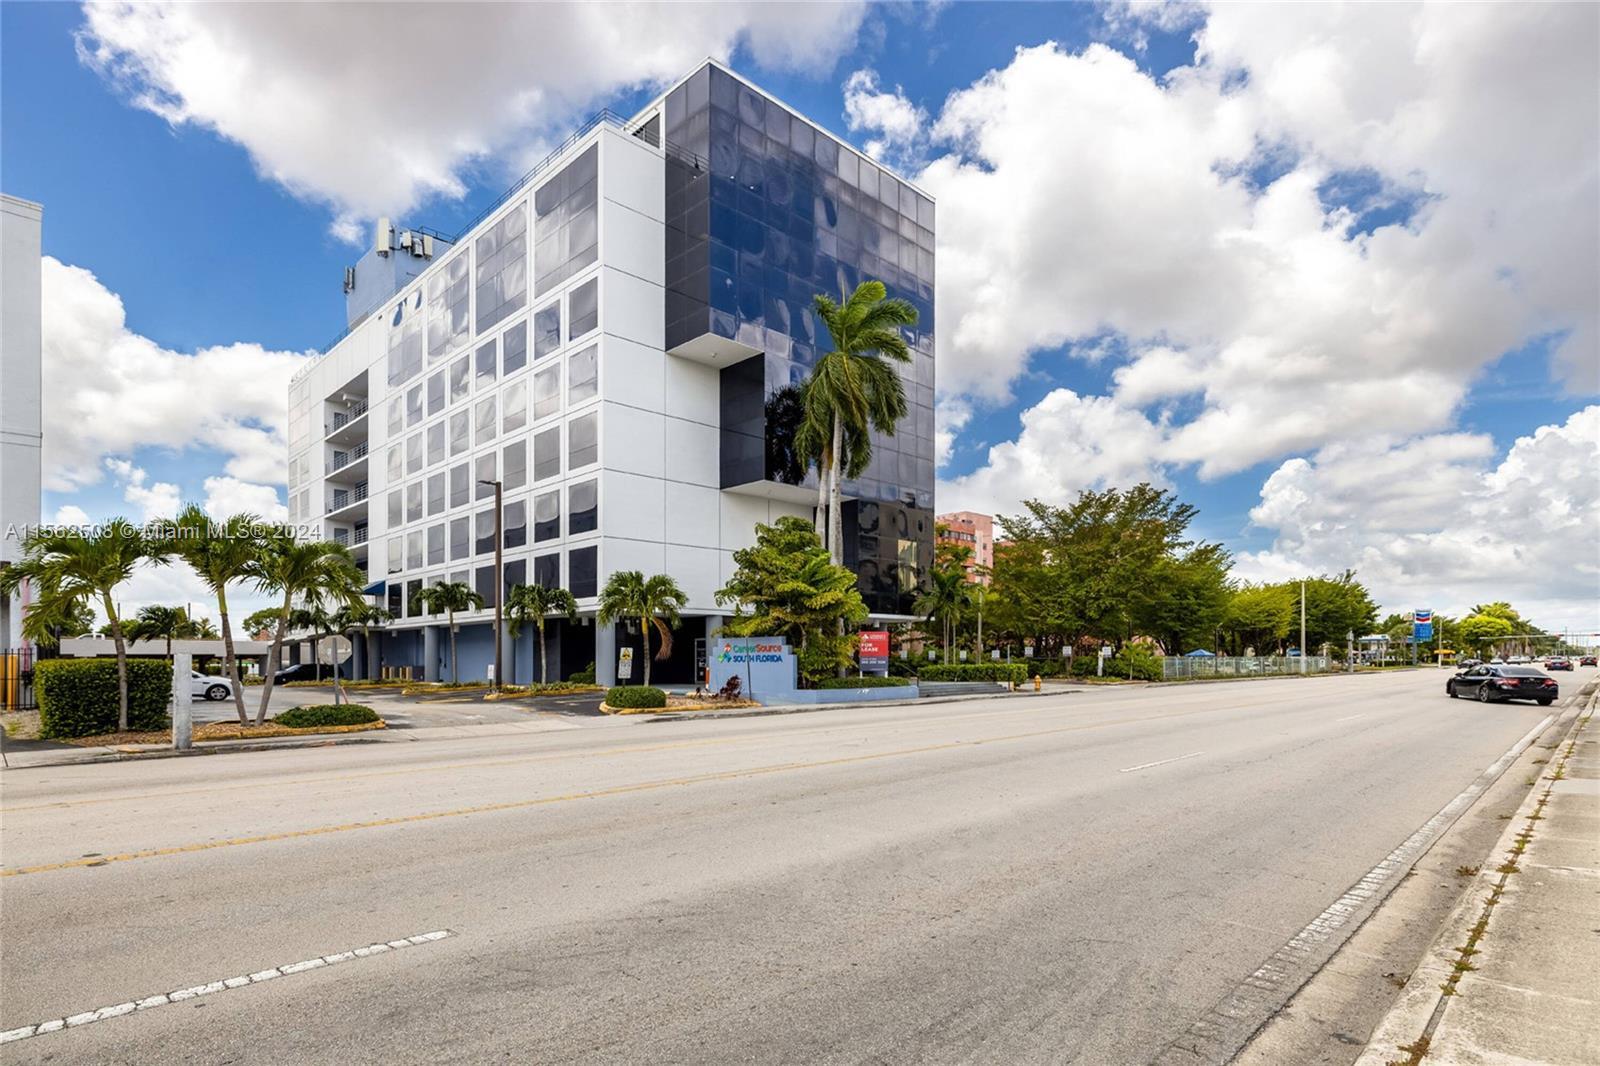 Photo of 5040 NW 7th St #Suite 510 in Miami, FL